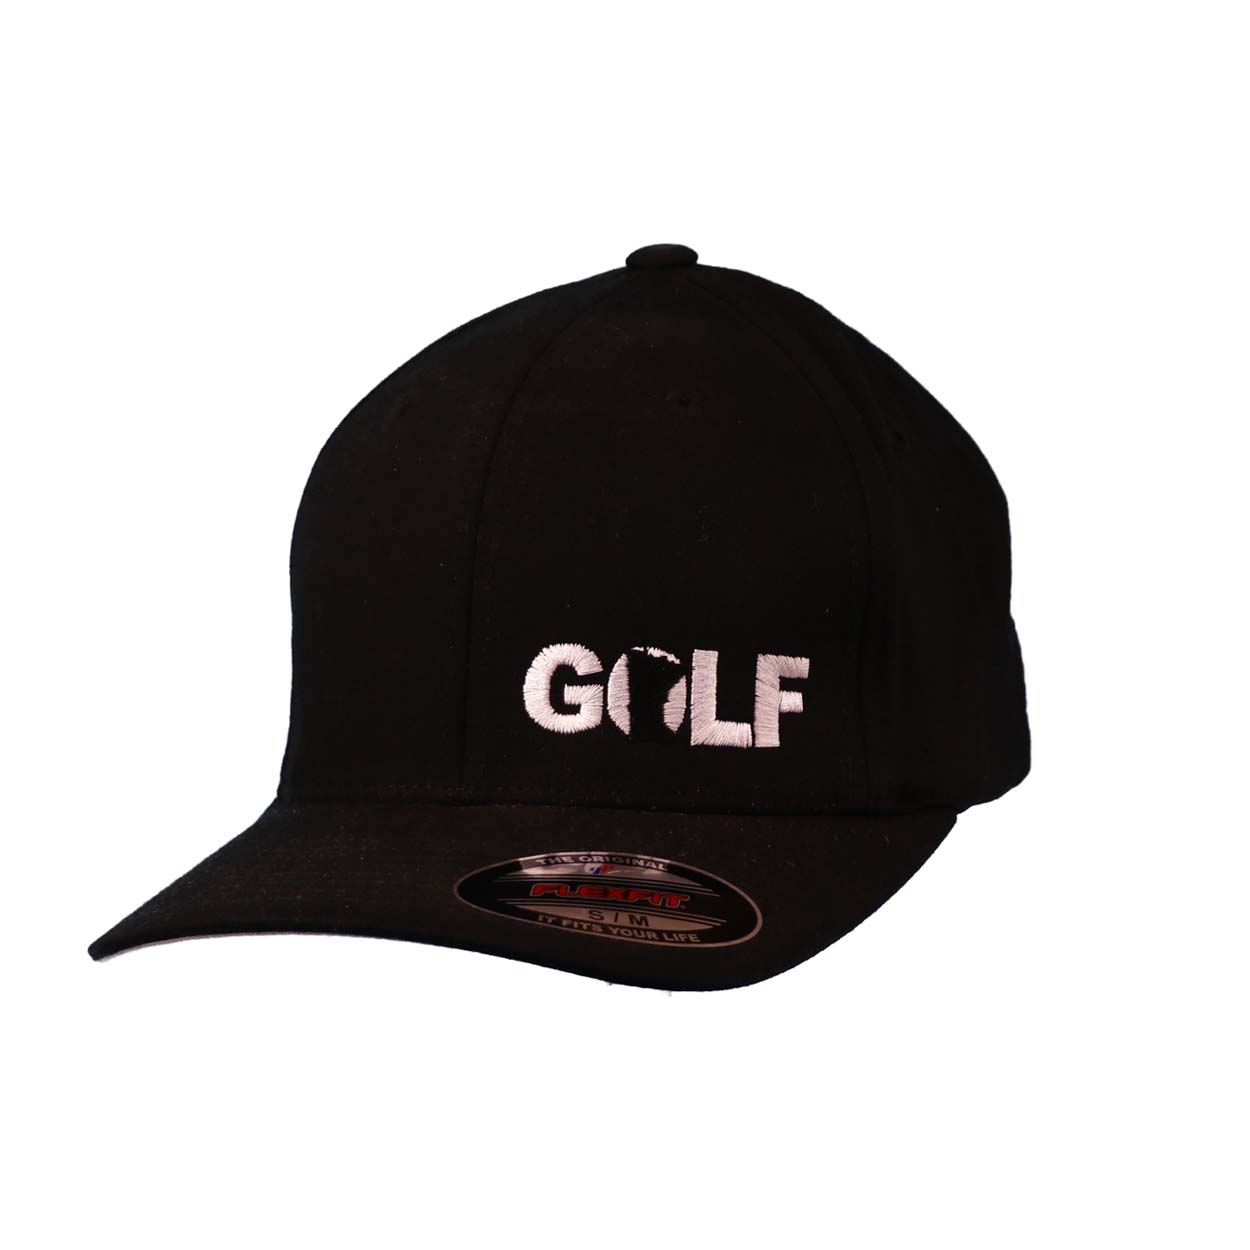 Golf Minnesota Night Out Pro Embroidered Flex Fit Trucker Hat Black/White